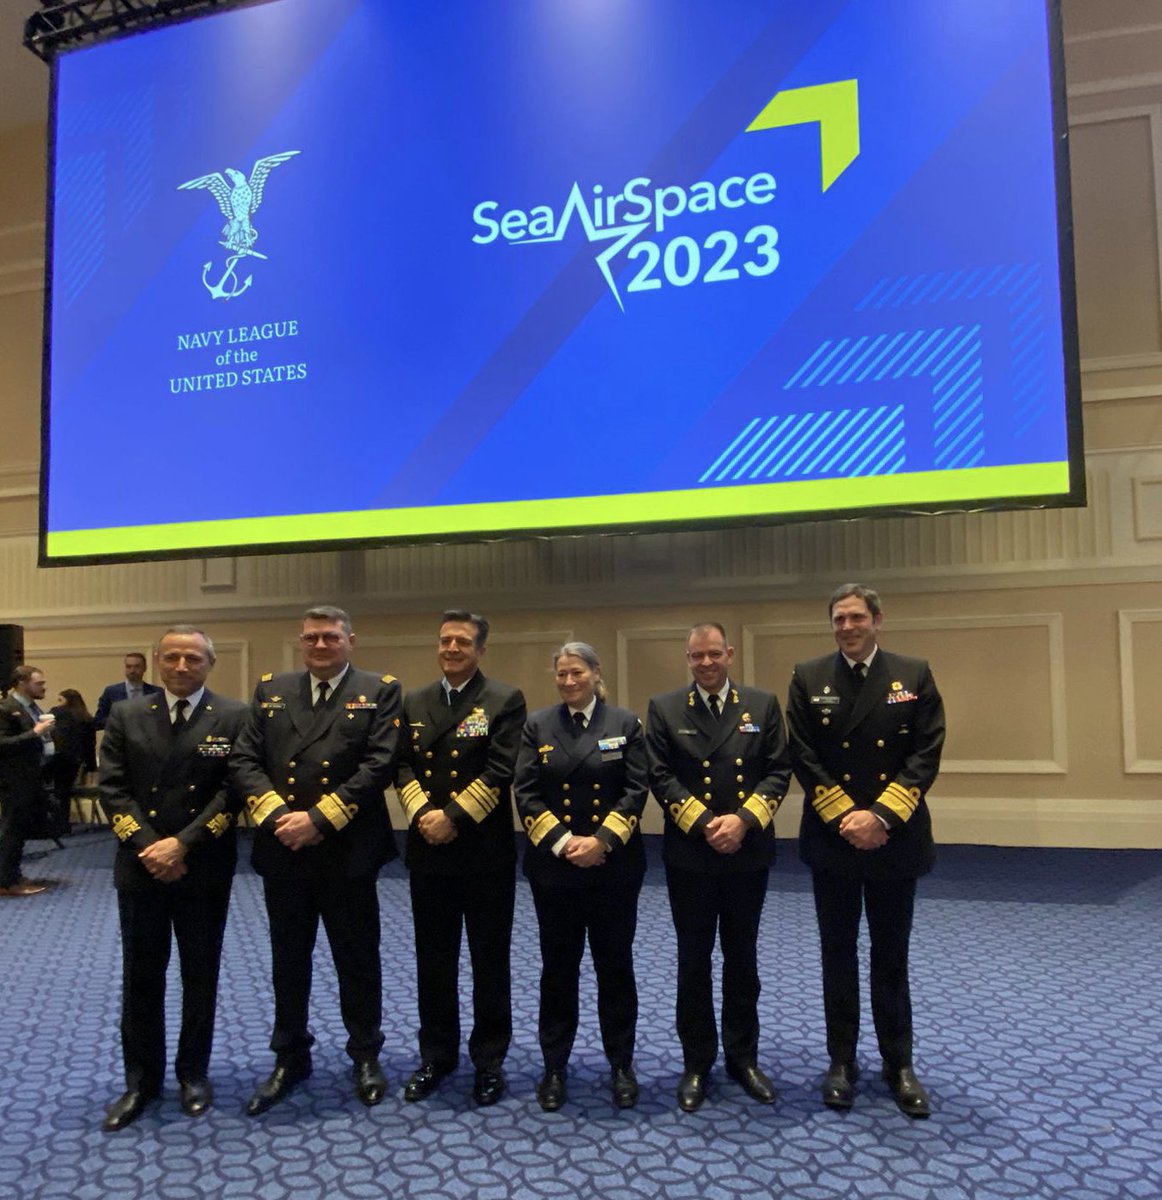 Discussing the challenges to maritime security and technology, meeting Allies and Partners during @SeaAirSpace Attending speeches/panel discussions of among others @SECNAV, @USNavyCNO, maritieme service chiefs and having bilateral meetings with US and Allied colleagues. #SAS2023